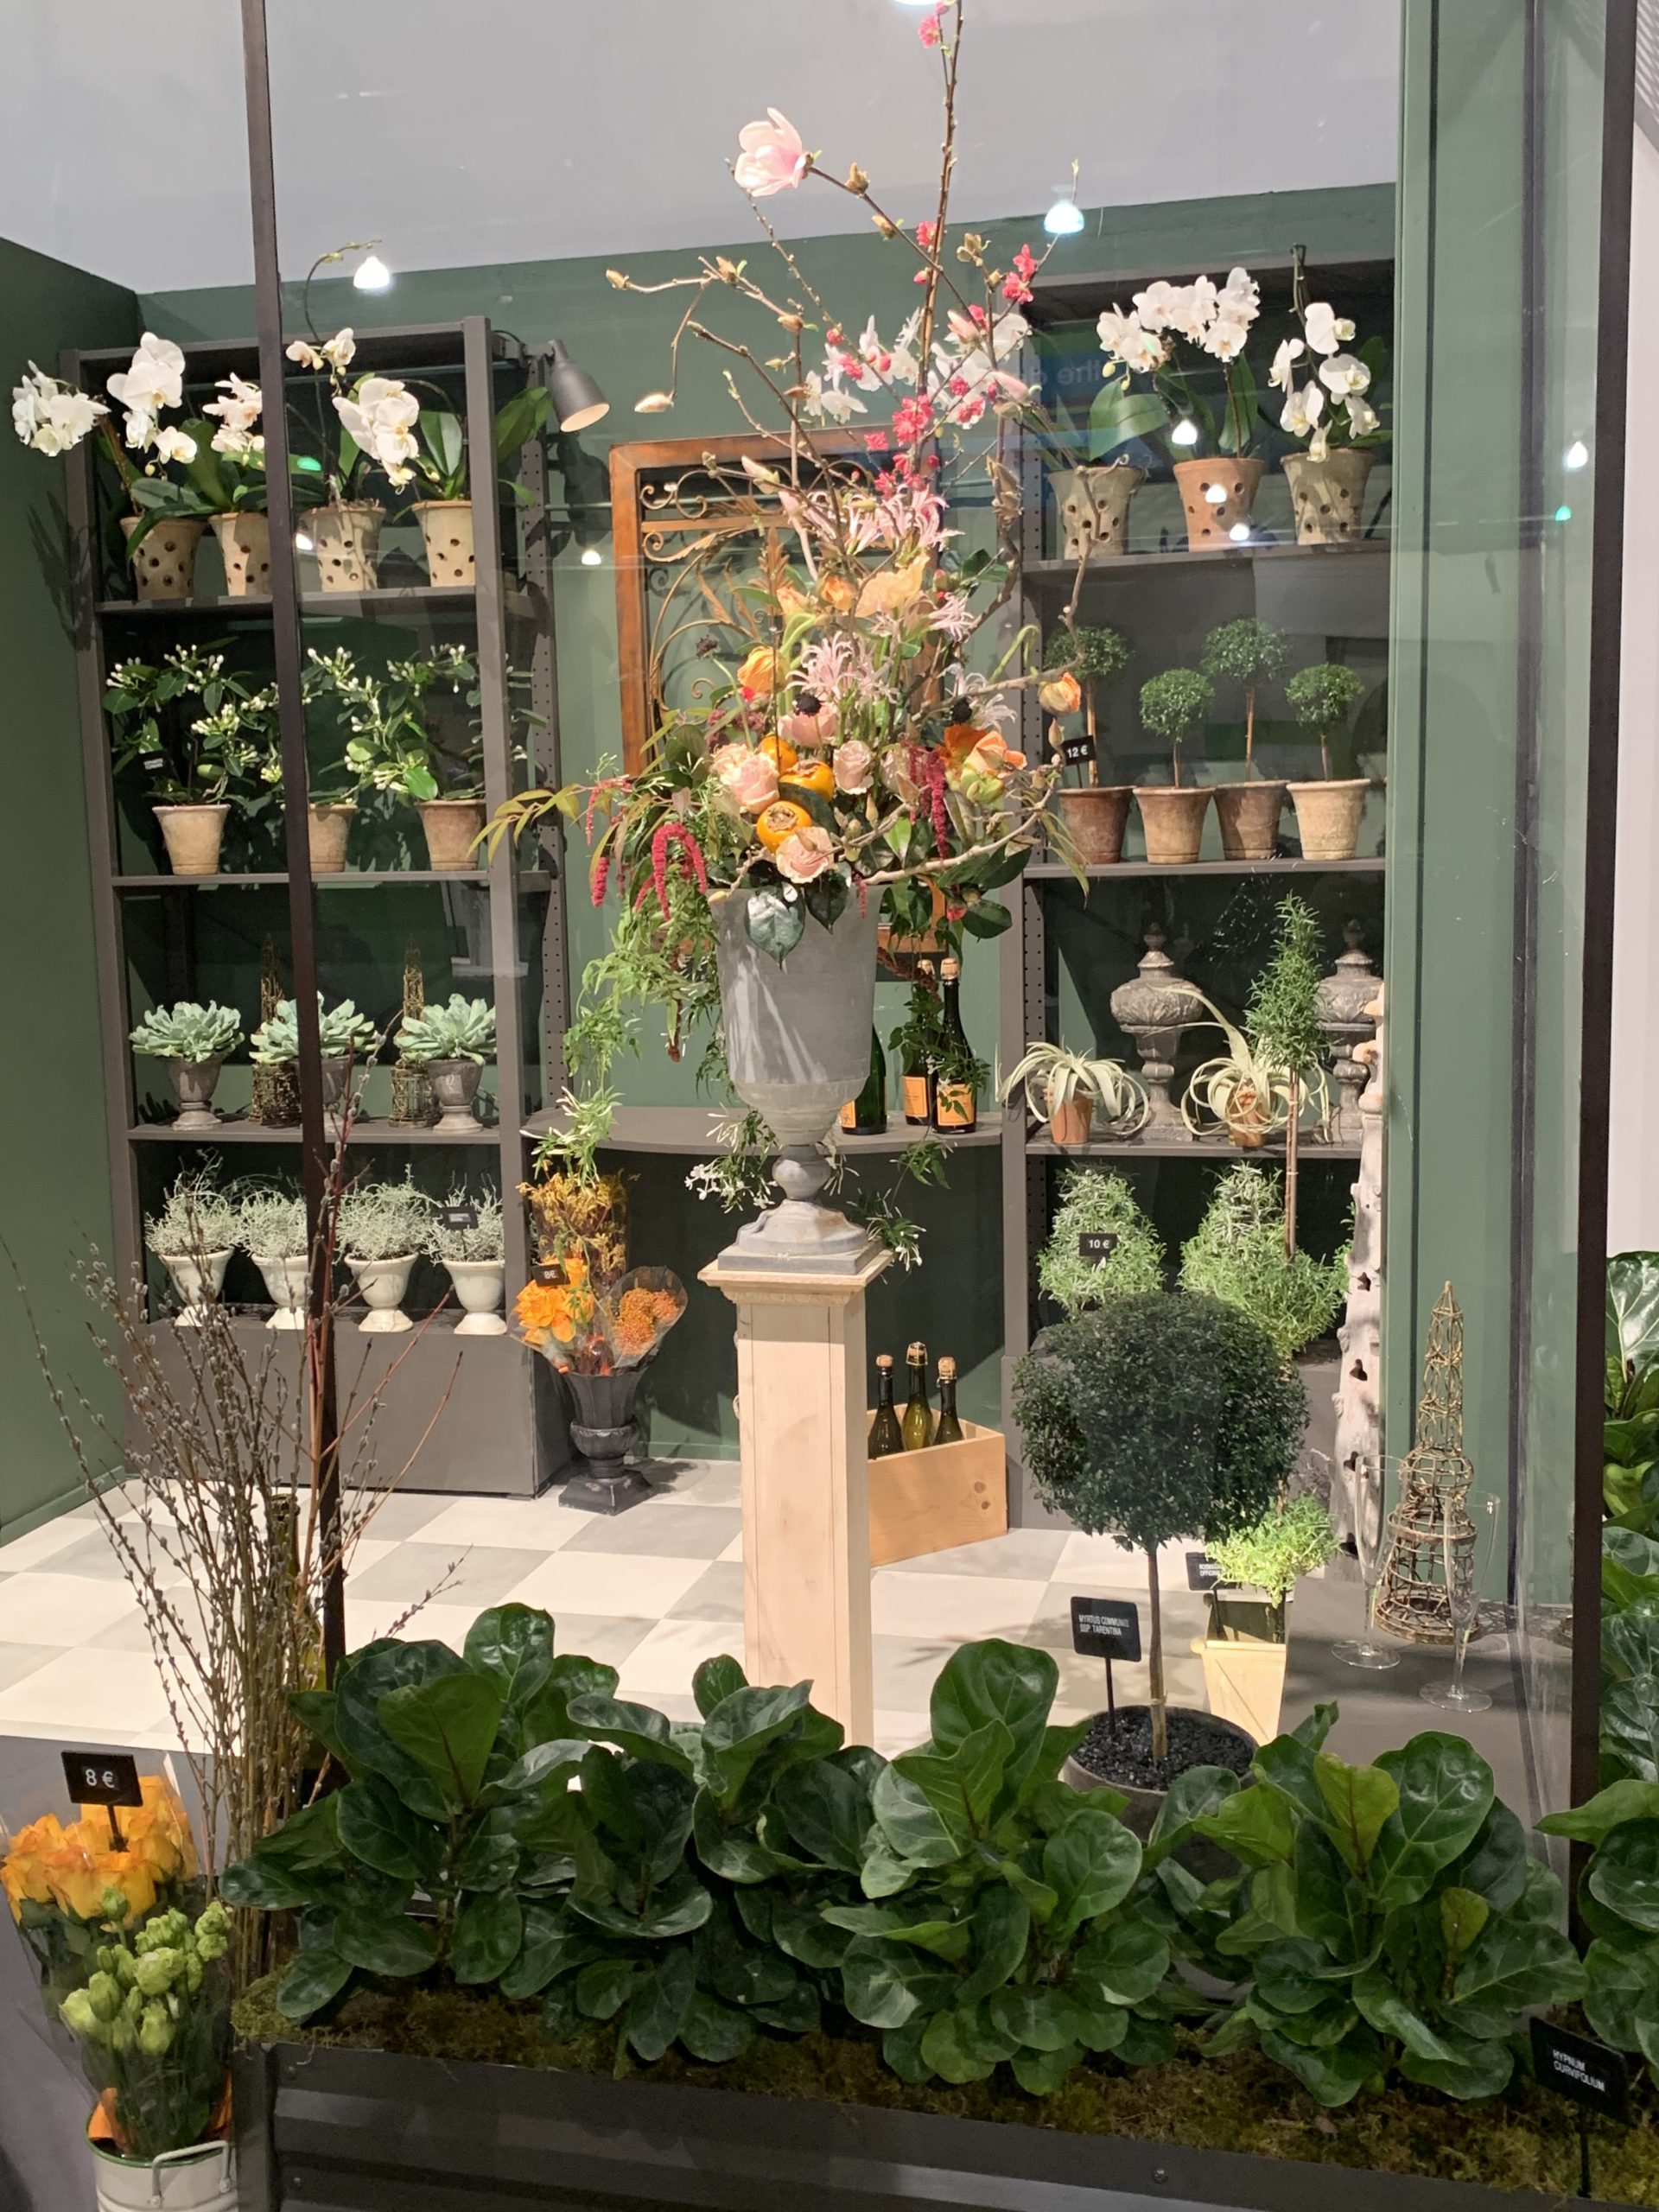 Mediterranean Floral Shoppe at the 2020 Philly Flower Show